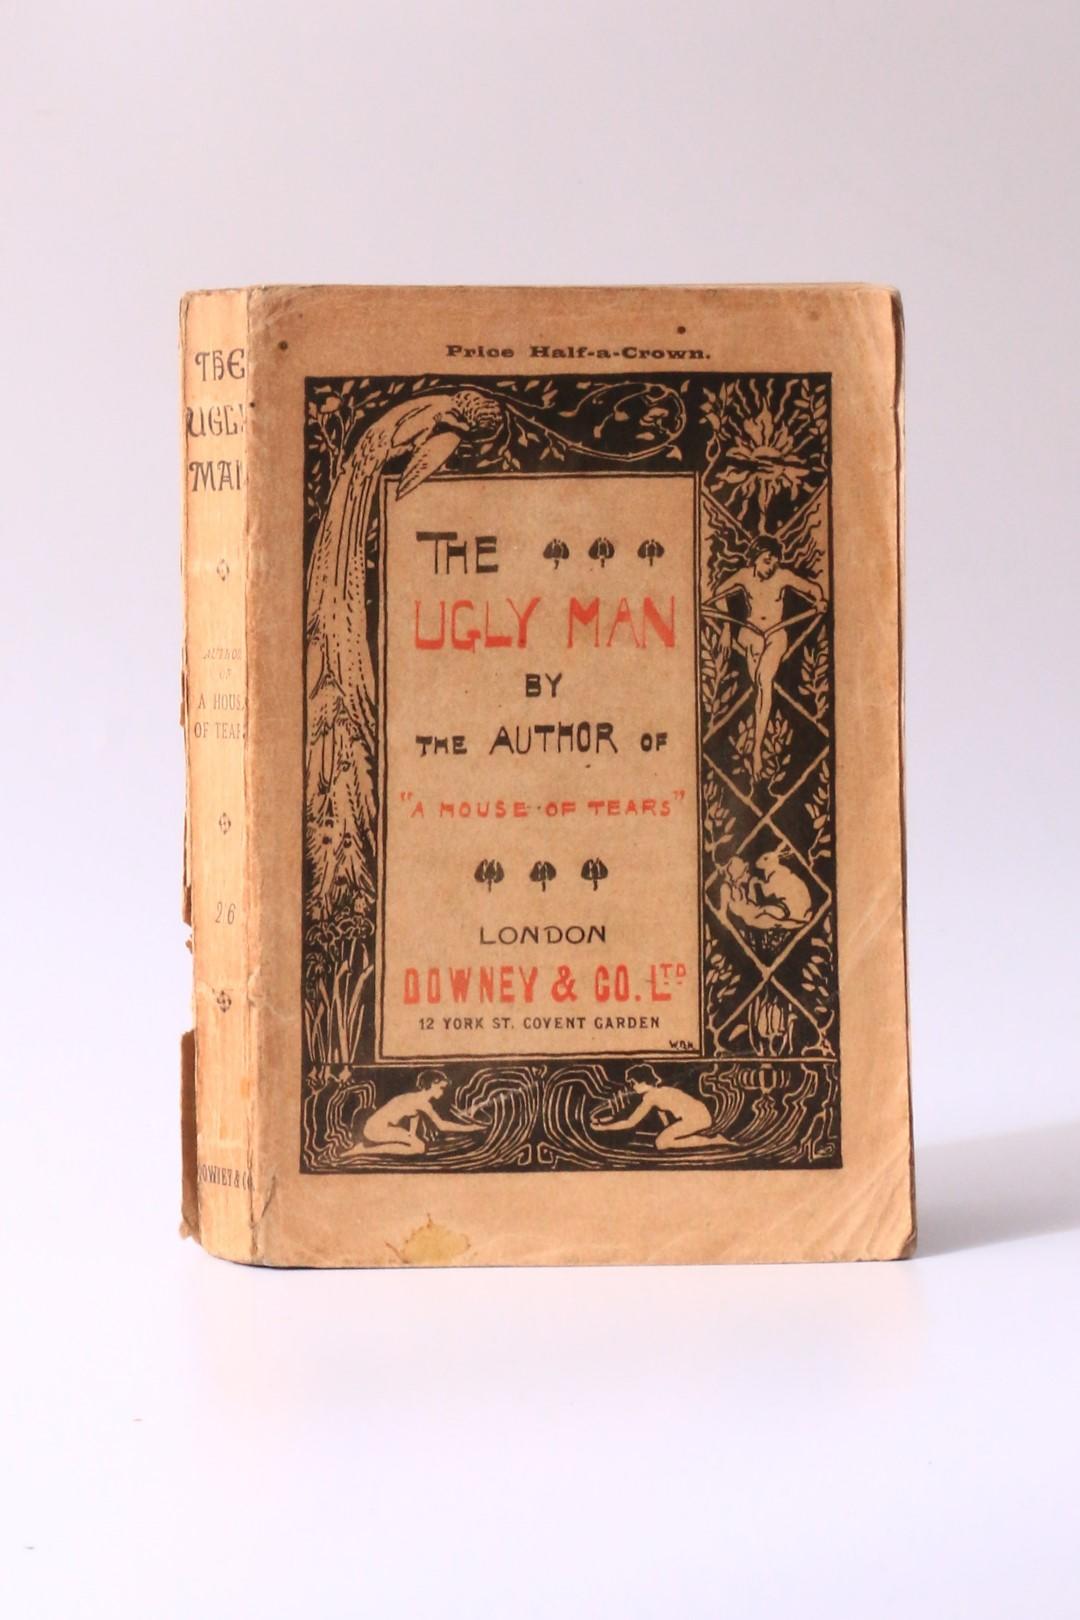 Anonymous [Edmund Downey] - The Ugly Man - Downey & Co., 1896, First Edition.